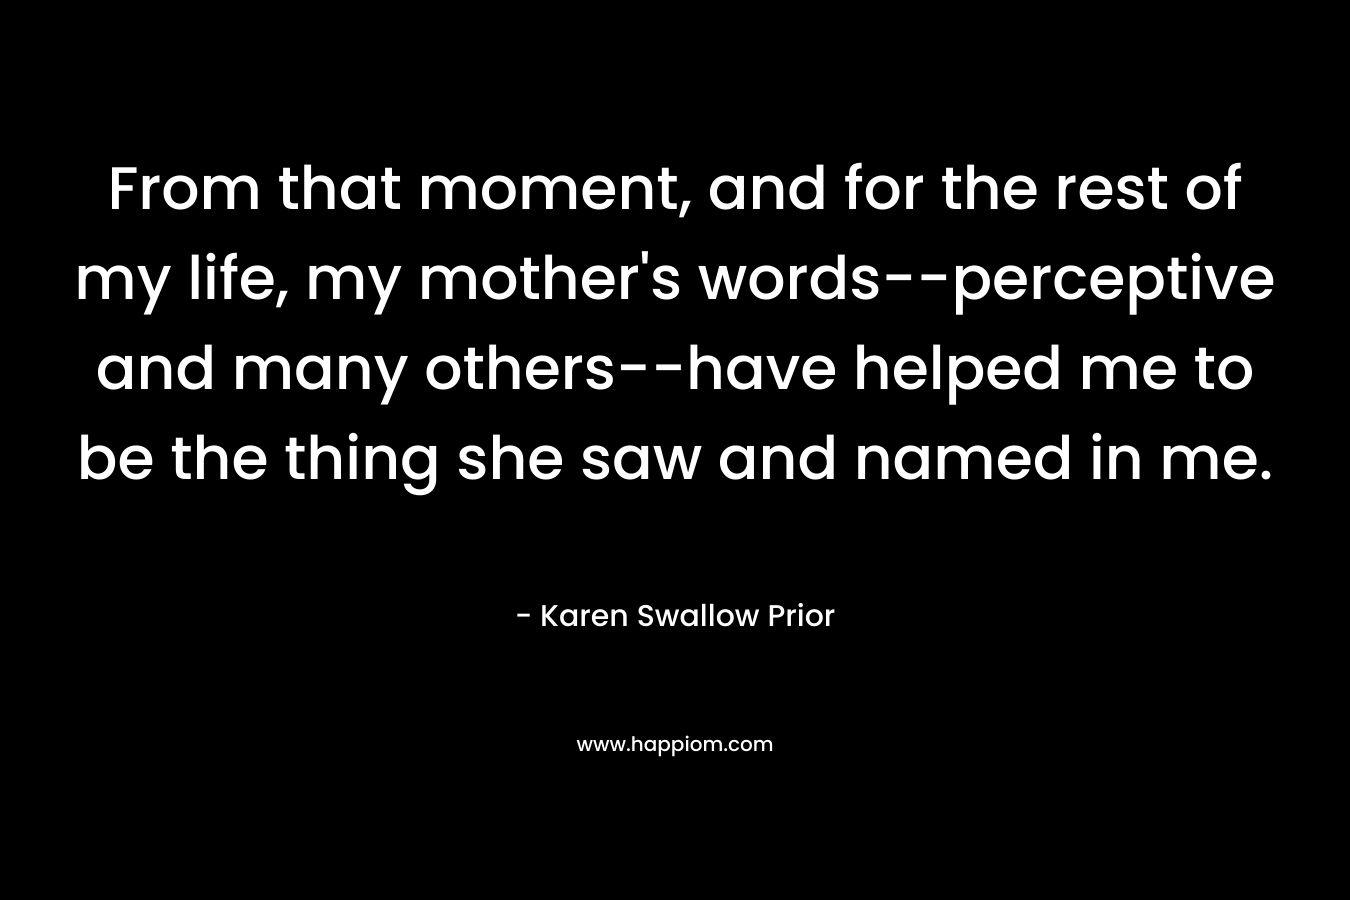 From that moment, and for the rest of my life, my mother's words--perceptive and many others--have helped me to be the thing she saw and named in me.